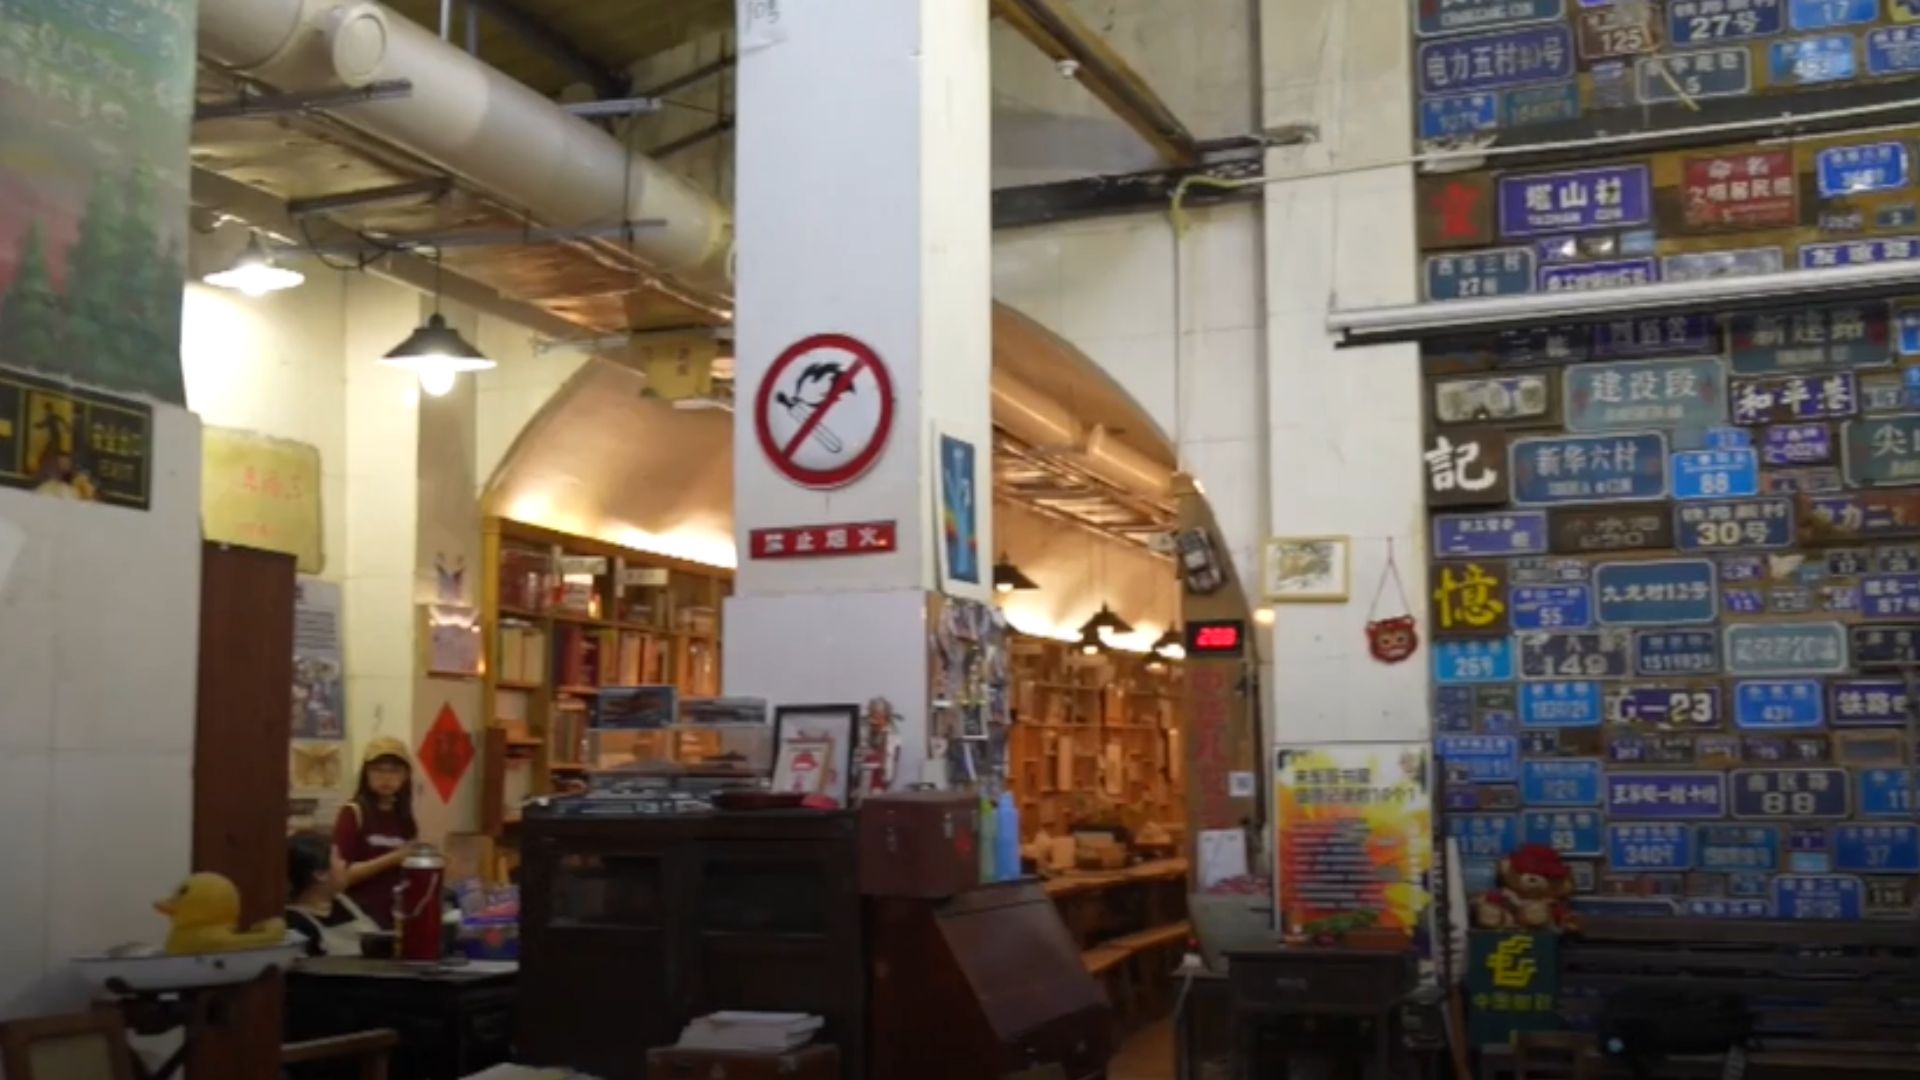 This bookstore was formerly a WWII bomb shelter. /CGTN